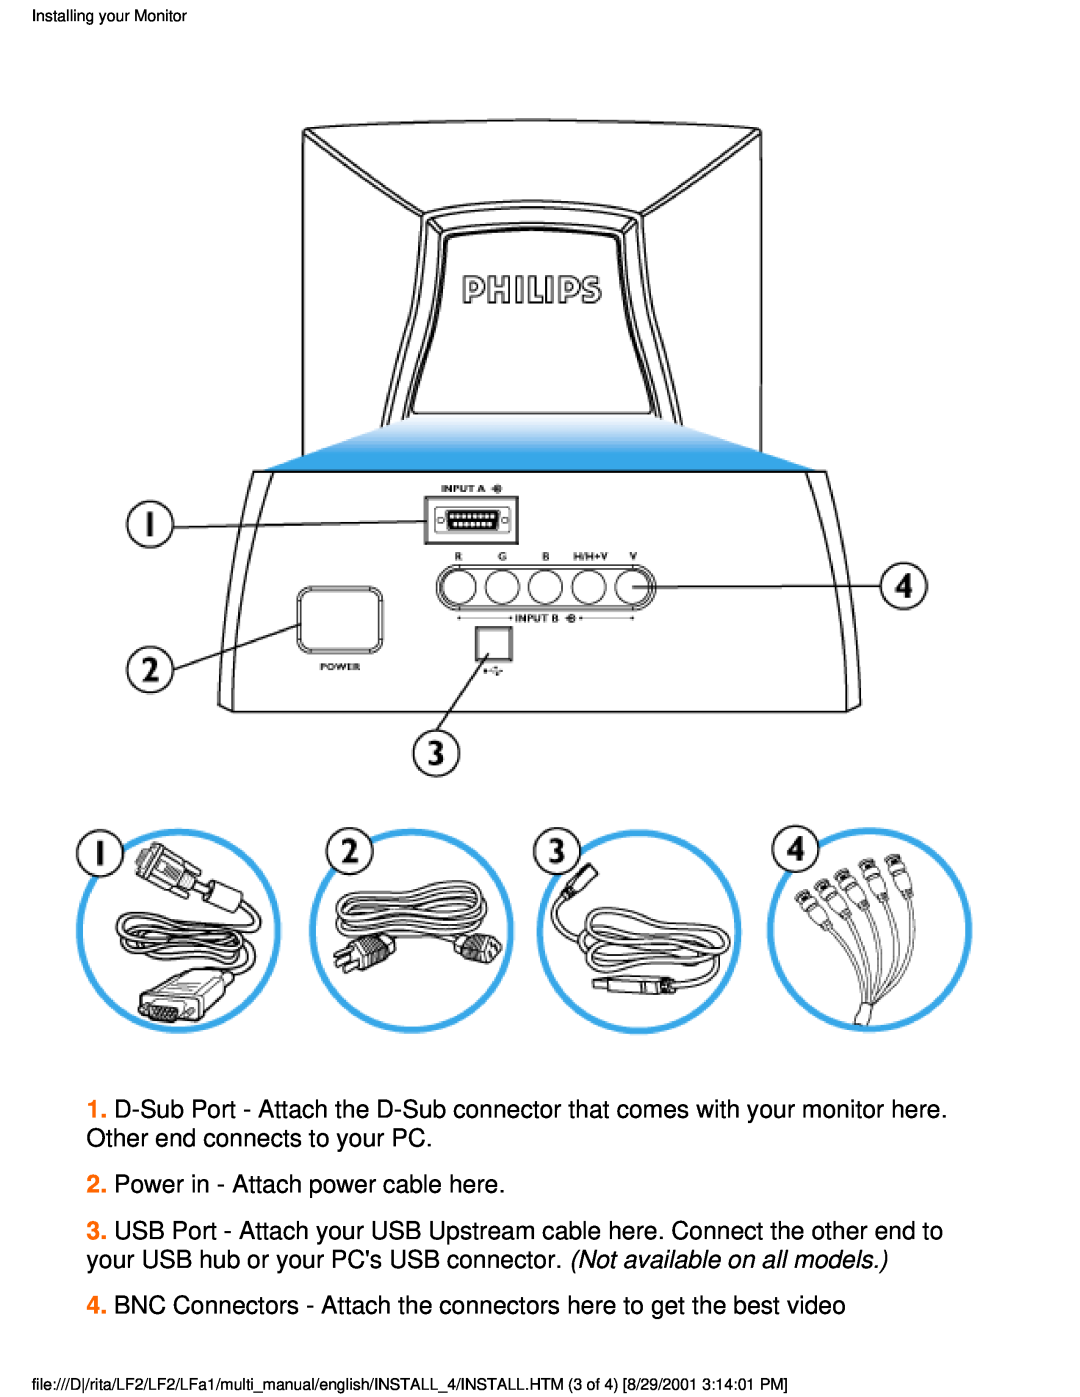 Philips 201P user manual Power in - Attach power cable here 